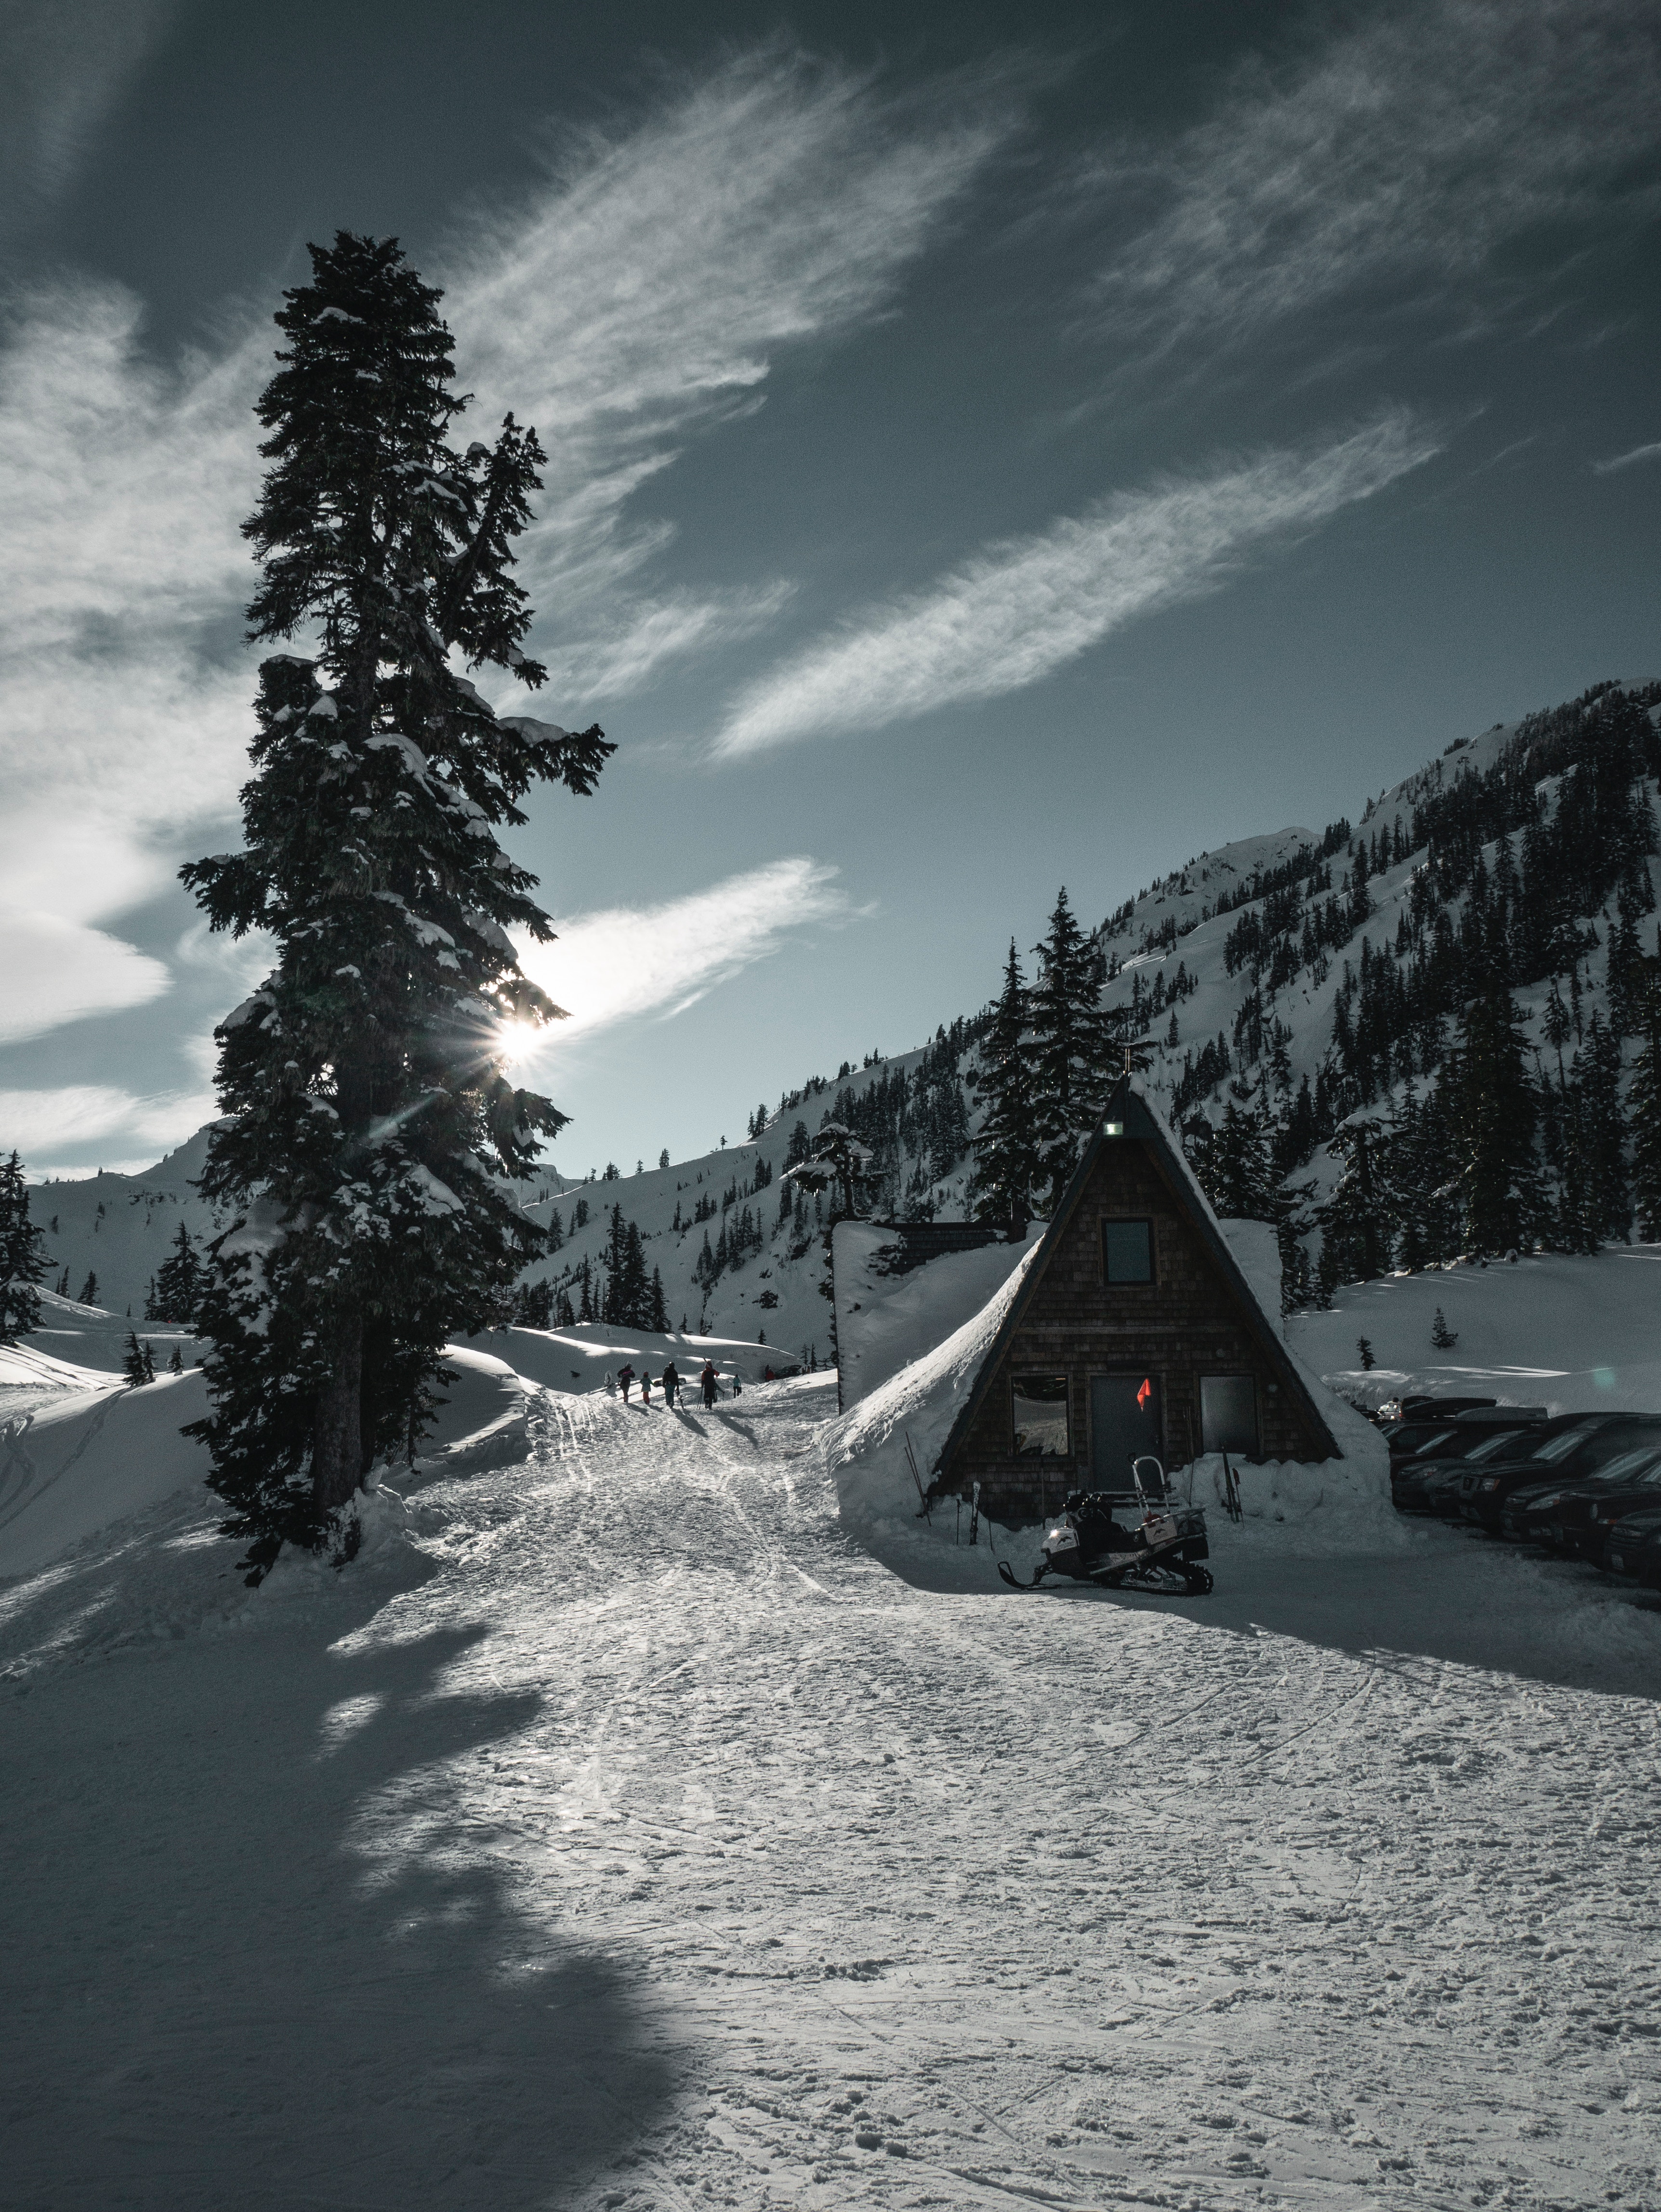 snow covered, winter, nature, snow, mountain, small house, lodge, snowbound, resort